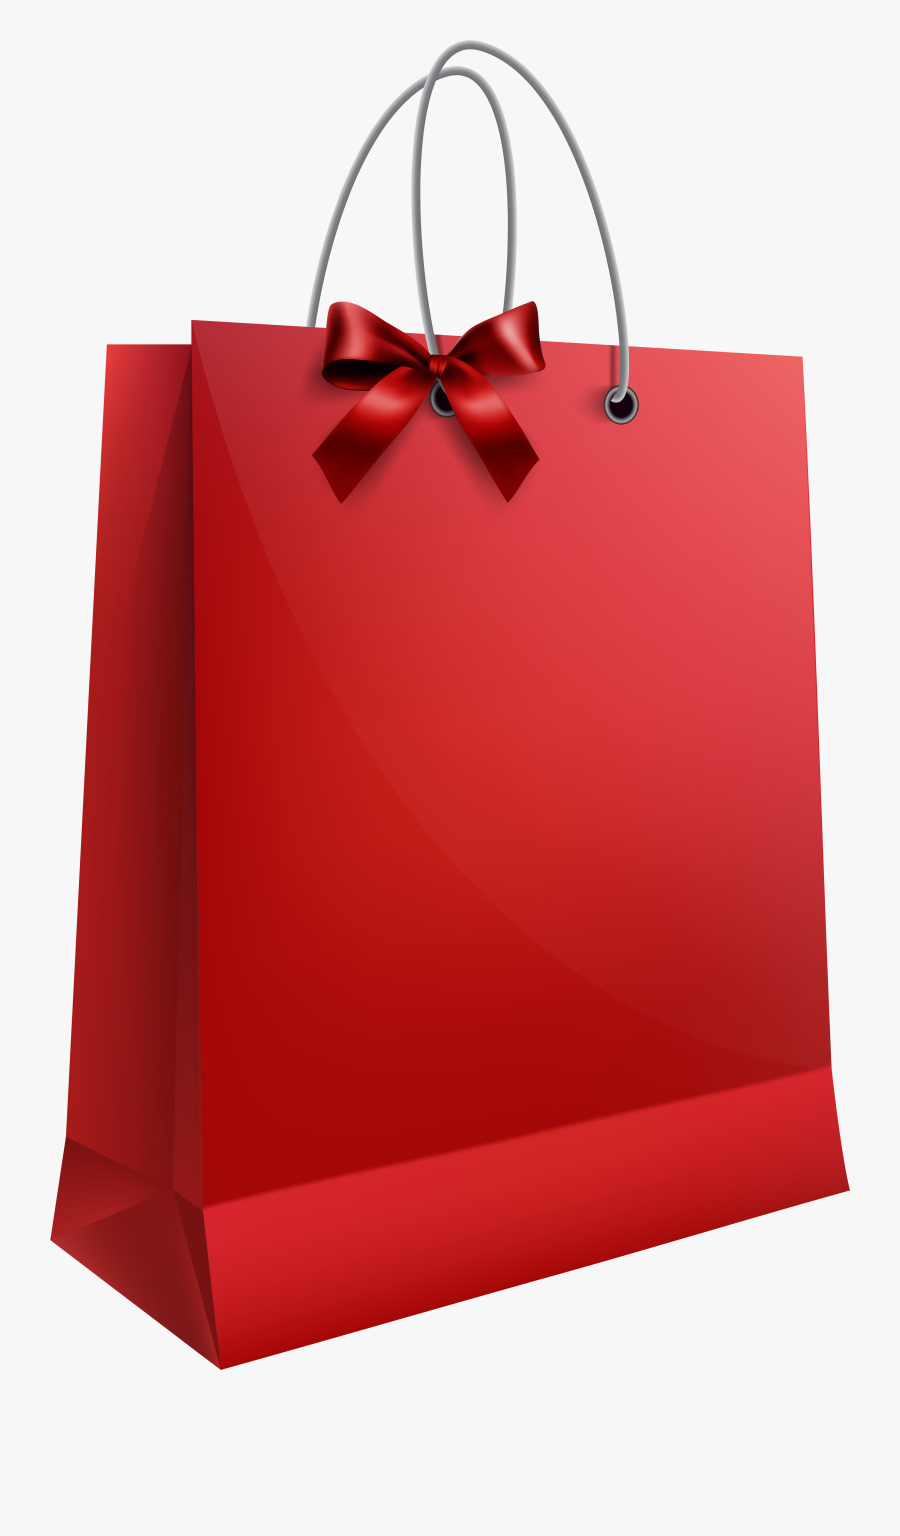 Red Gift Bag Png, Transparent Clipart